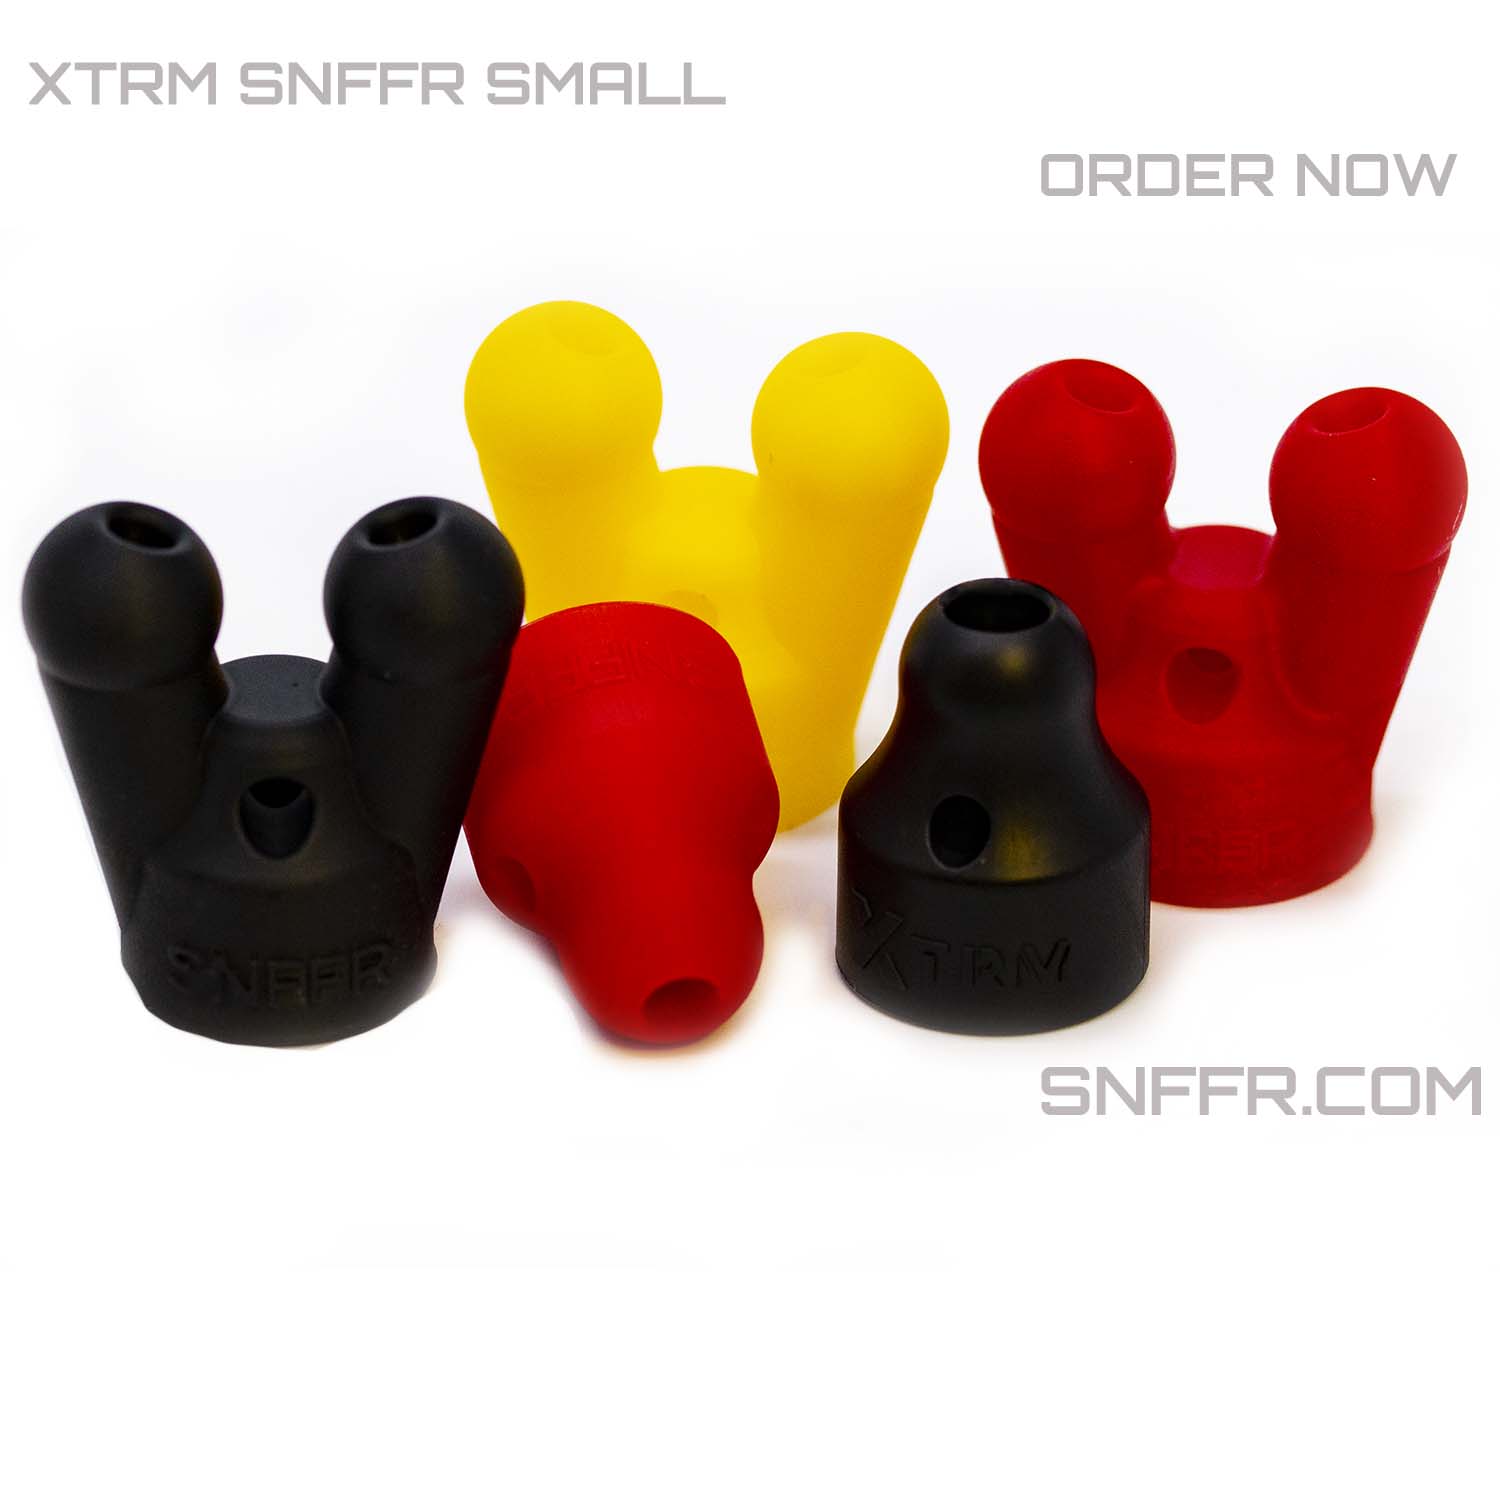 XTRM ® poppers snffr